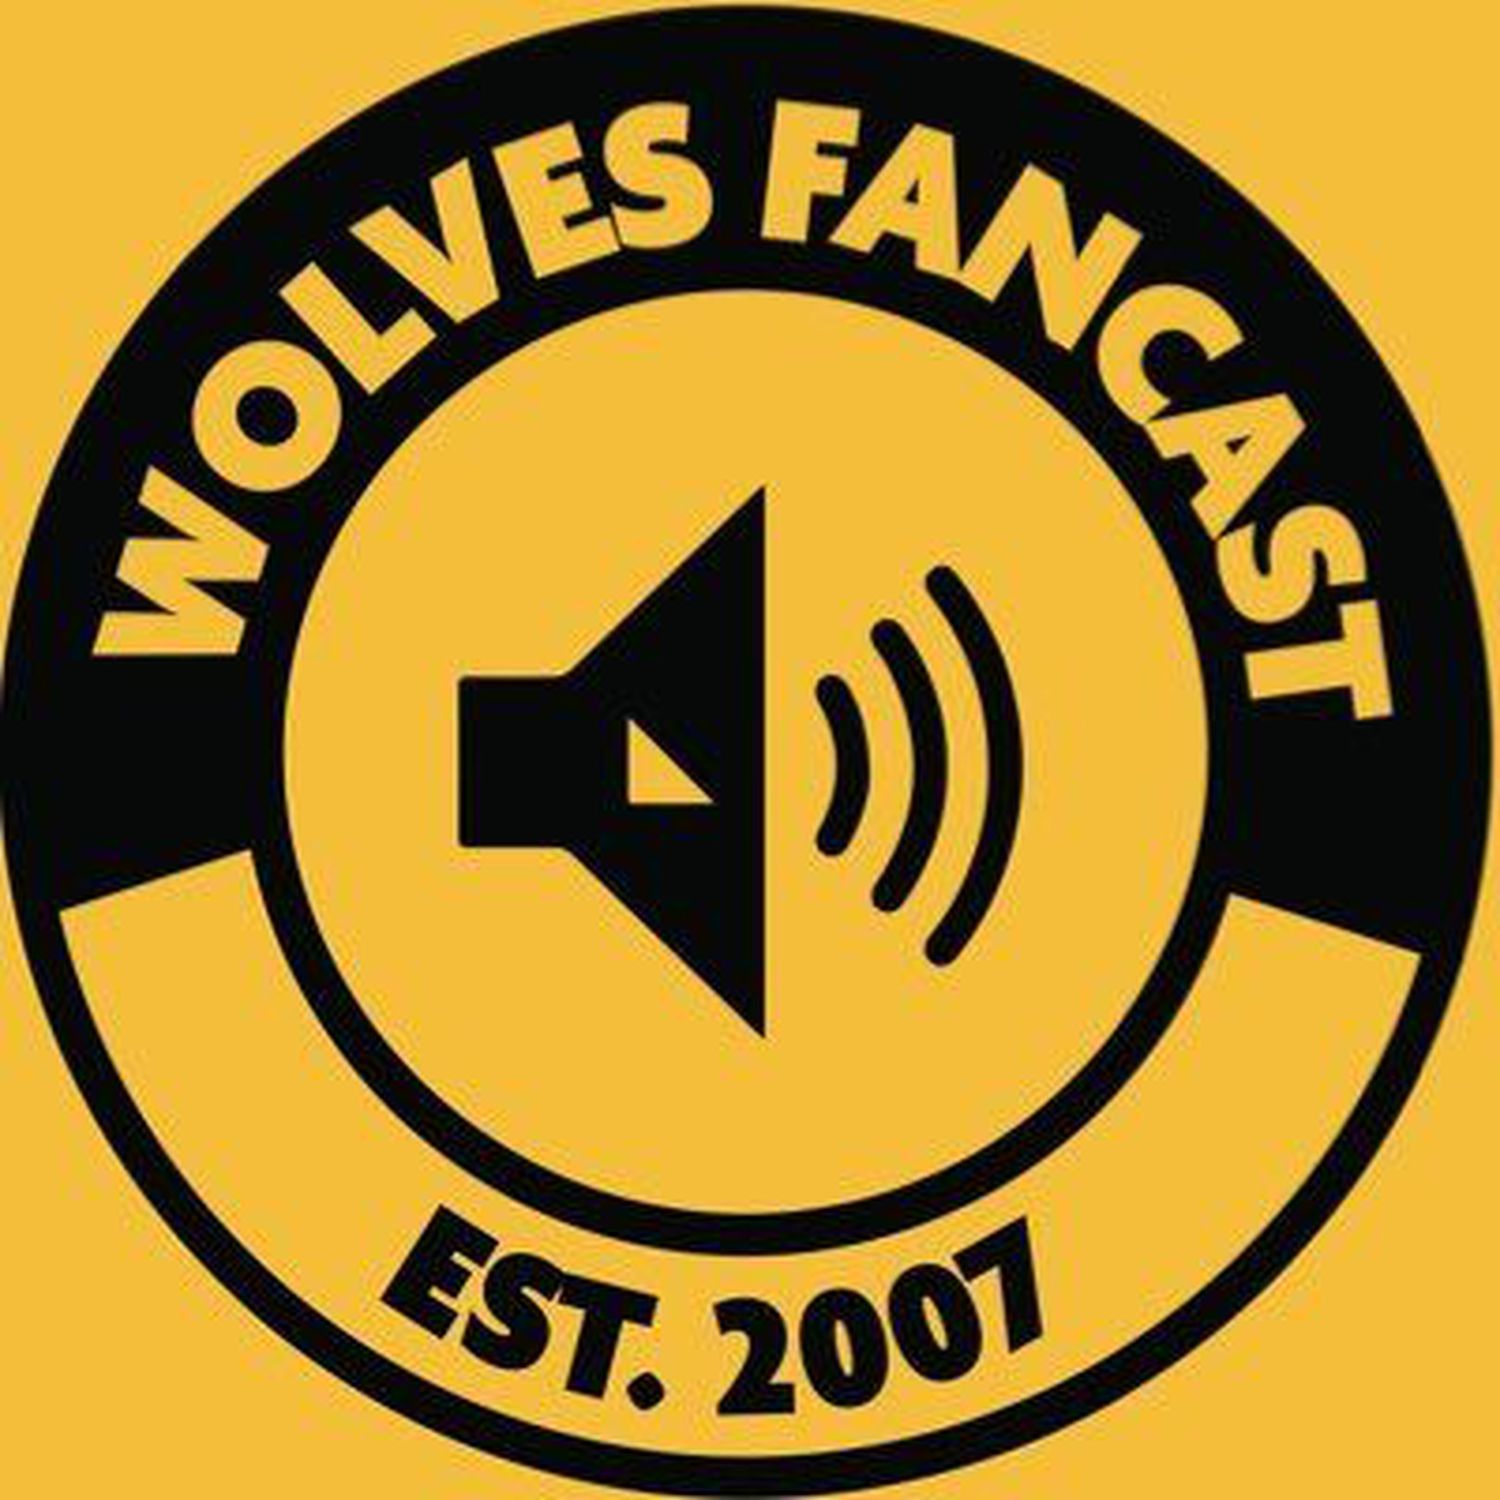 Wolves 1-0 Southampton Reaction Show - 1st league win of the season! Will Wolves sign Diego Costa